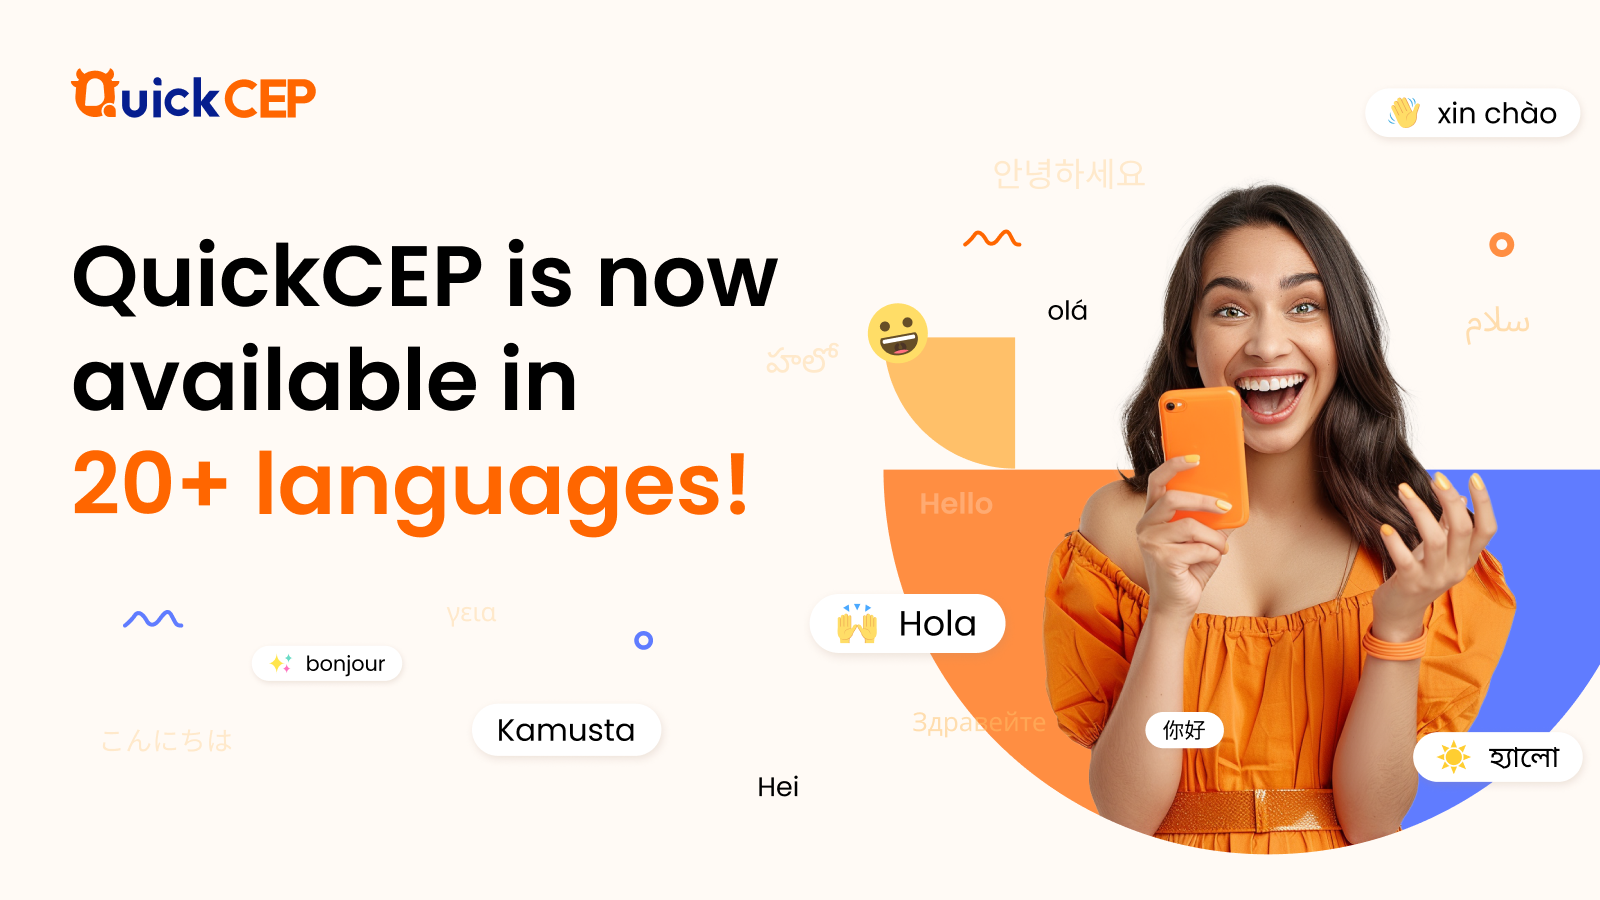 QuickCEP is now available in over 20 languages